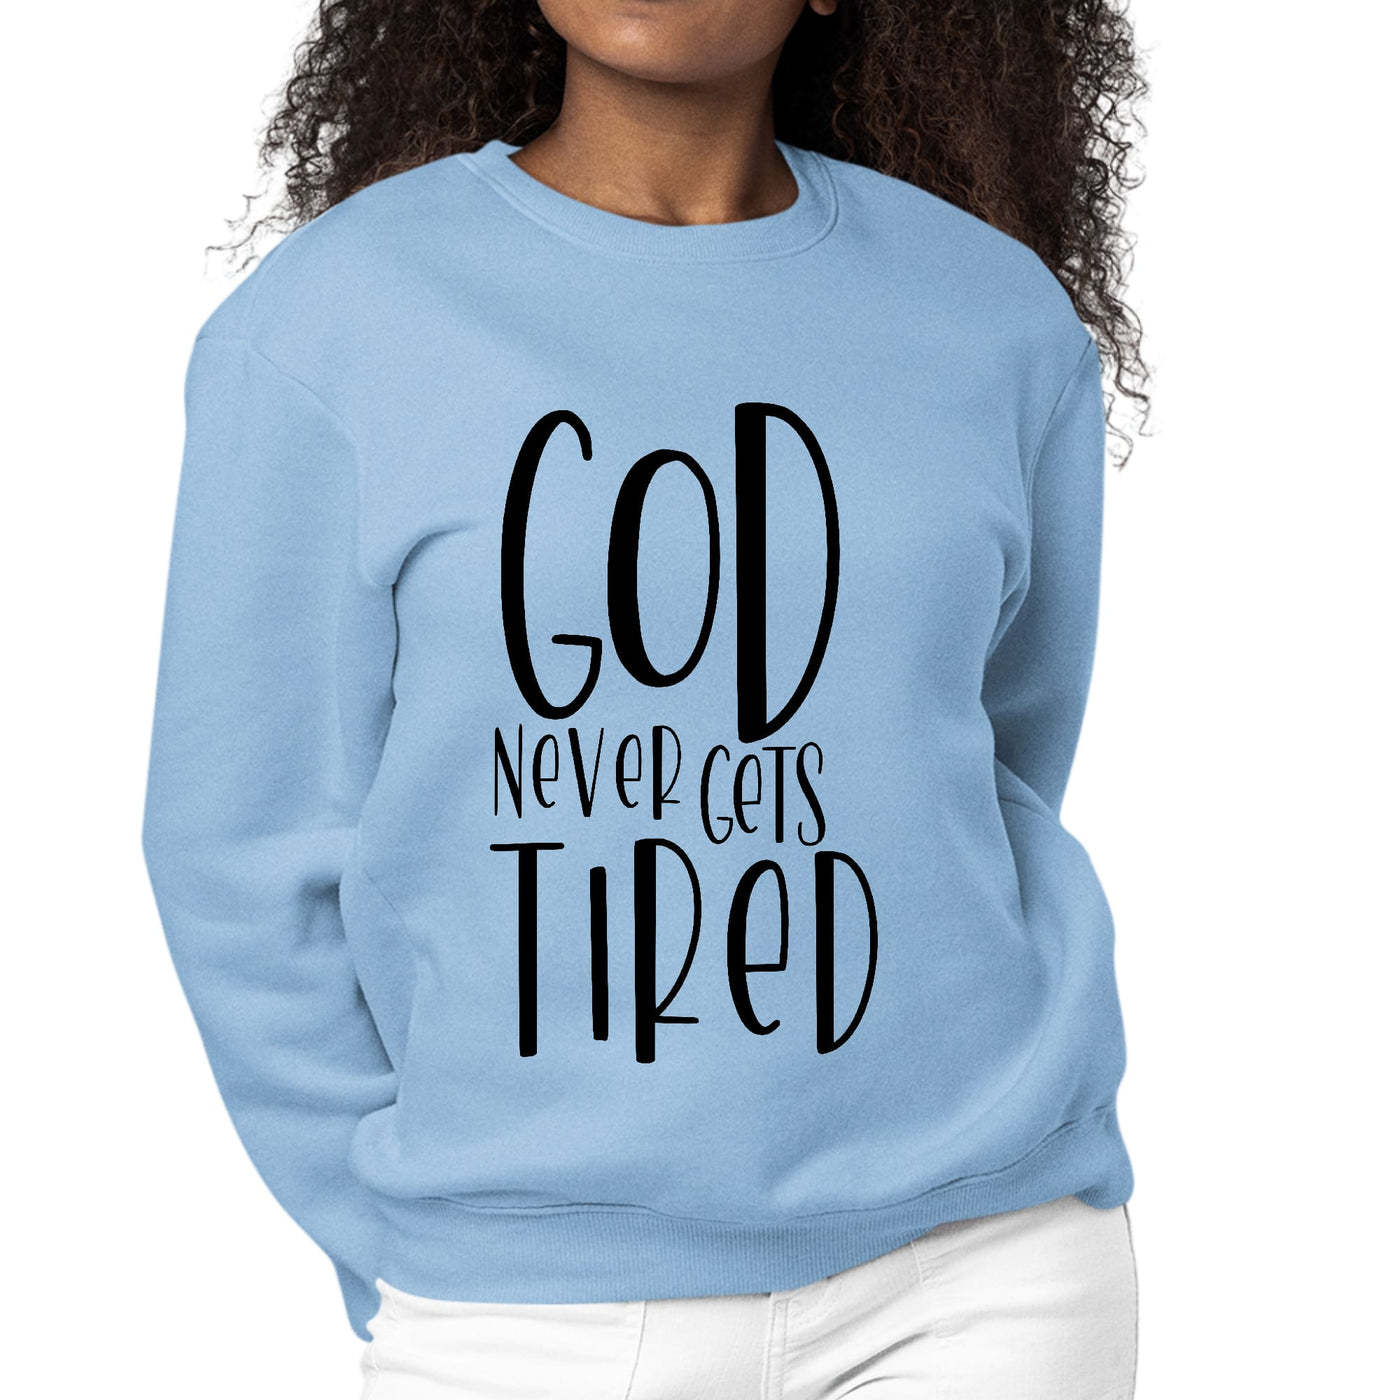 Womens Graphic Sweatshirt Say It Soul - God Never Gets Tired - Black - Womens